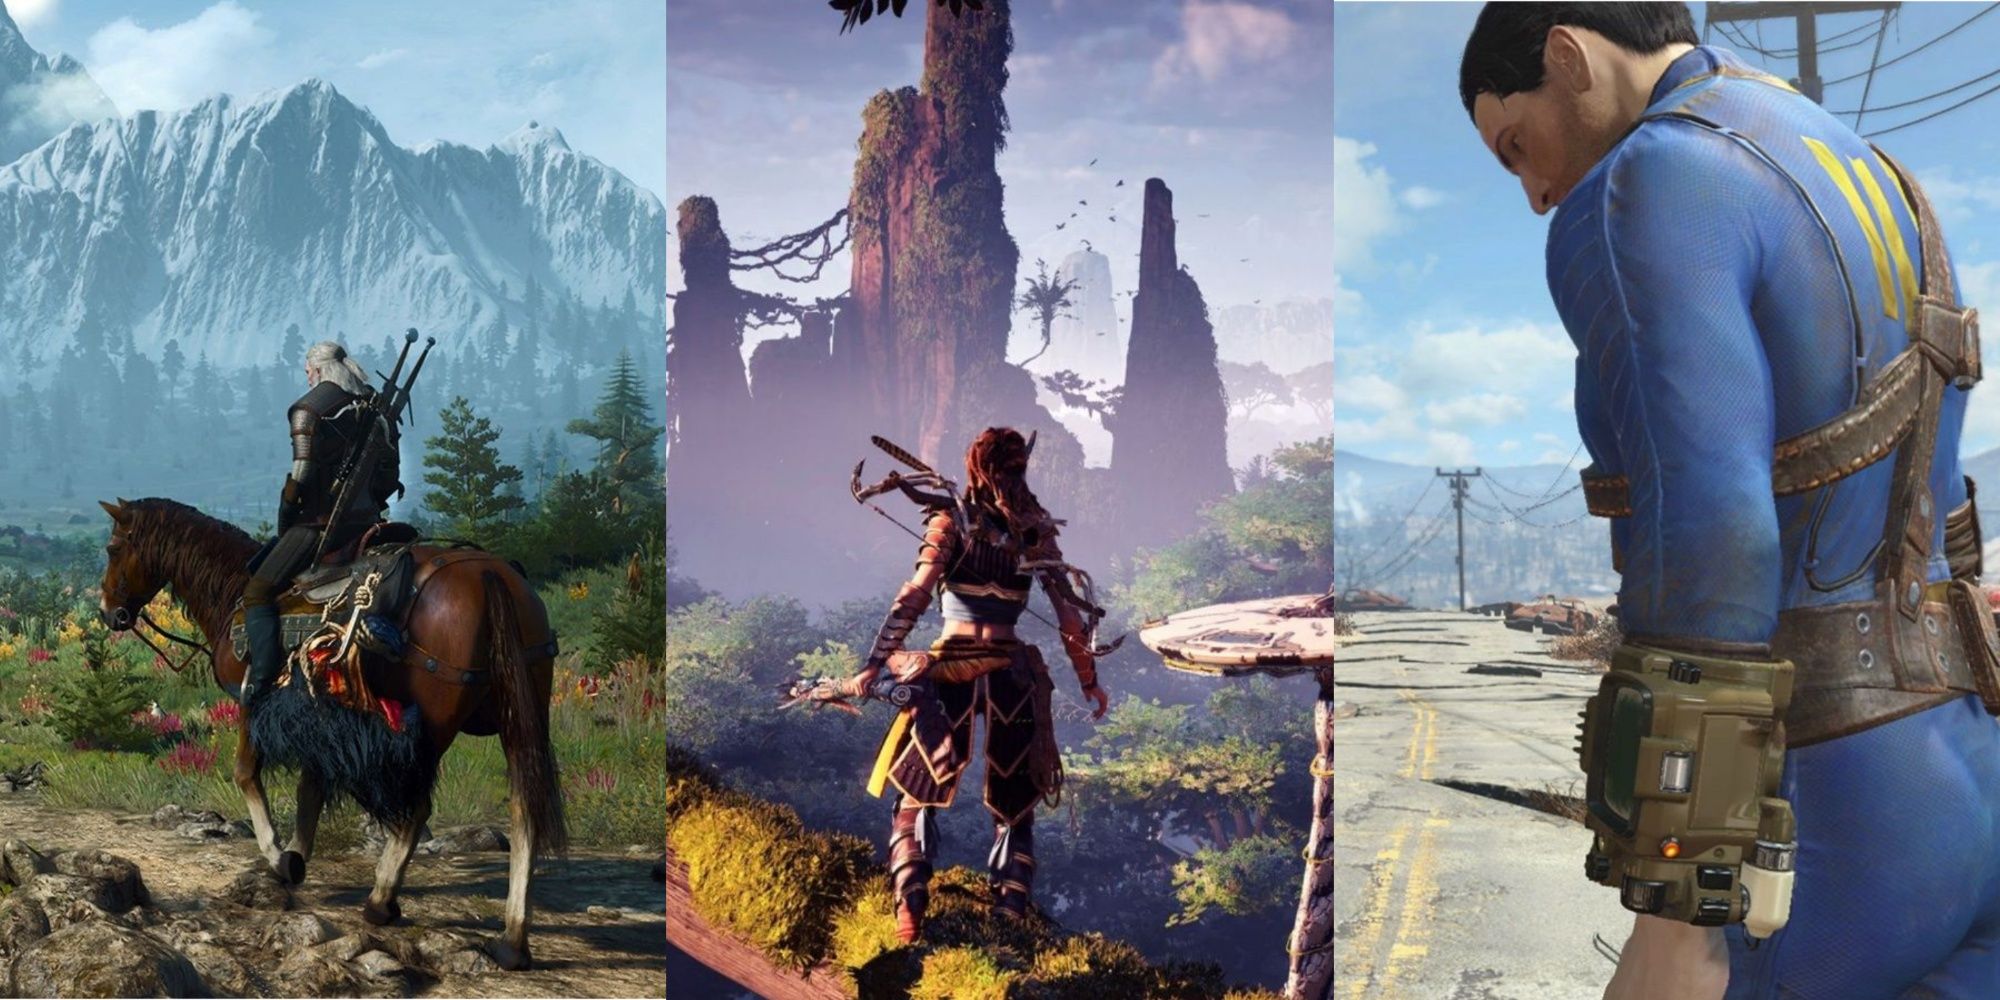 A trisplit of Geralt from The Witcher 3, Aloy from Horizon Zero Dawn and the Sole Survivor in Fallout 4